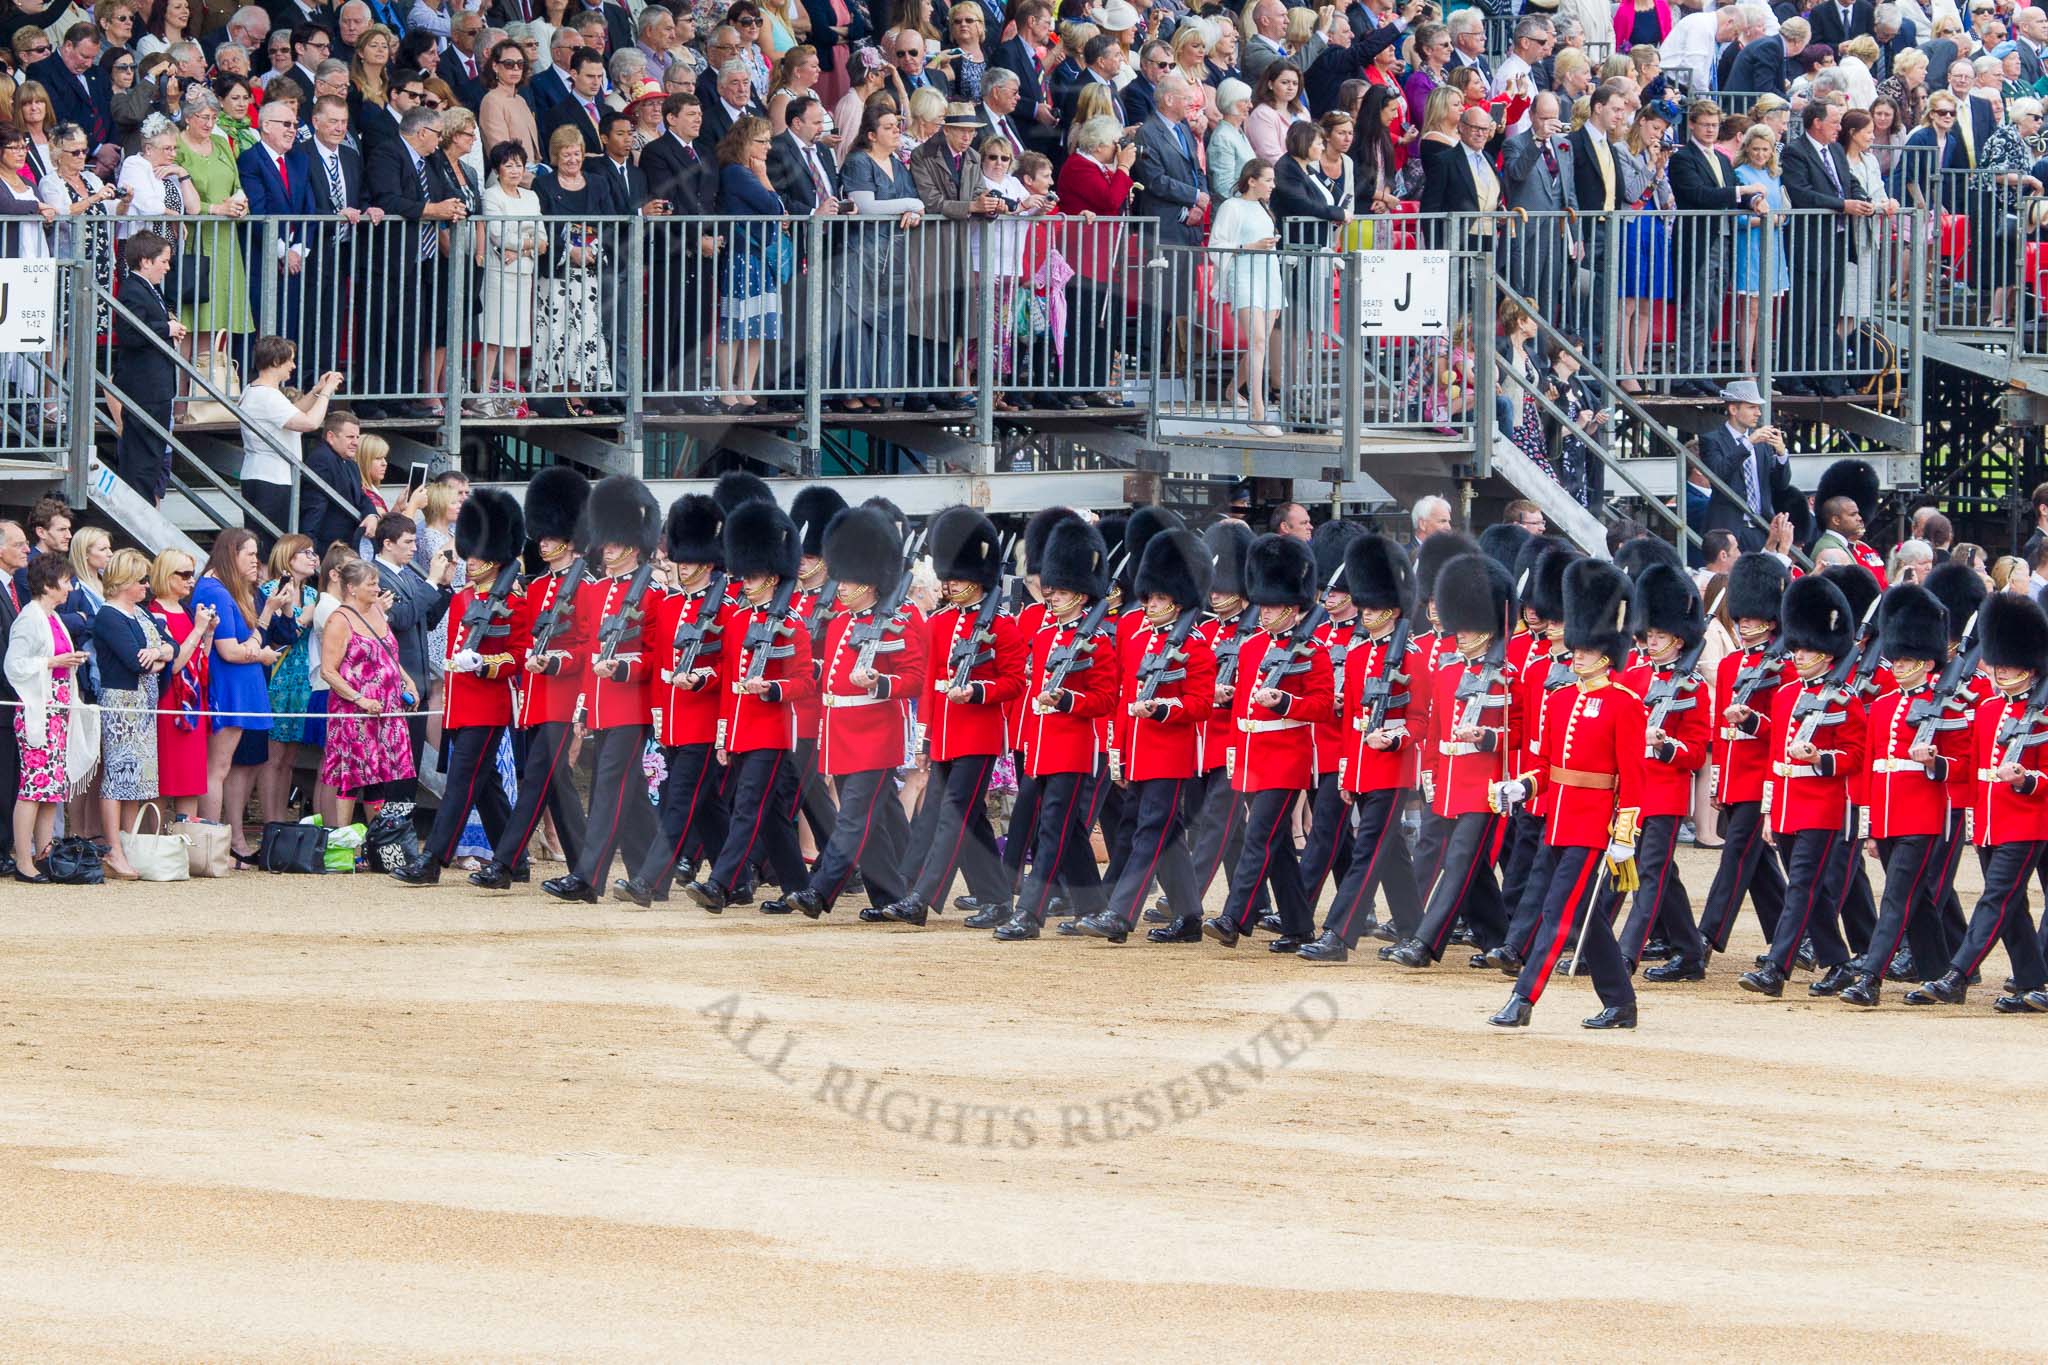 Trooping the Colour 2014.
Horse Guards Parade, Westminster,
London SW1A,

United Kingdom,
on 14 June 2014 at 11:35, image #605